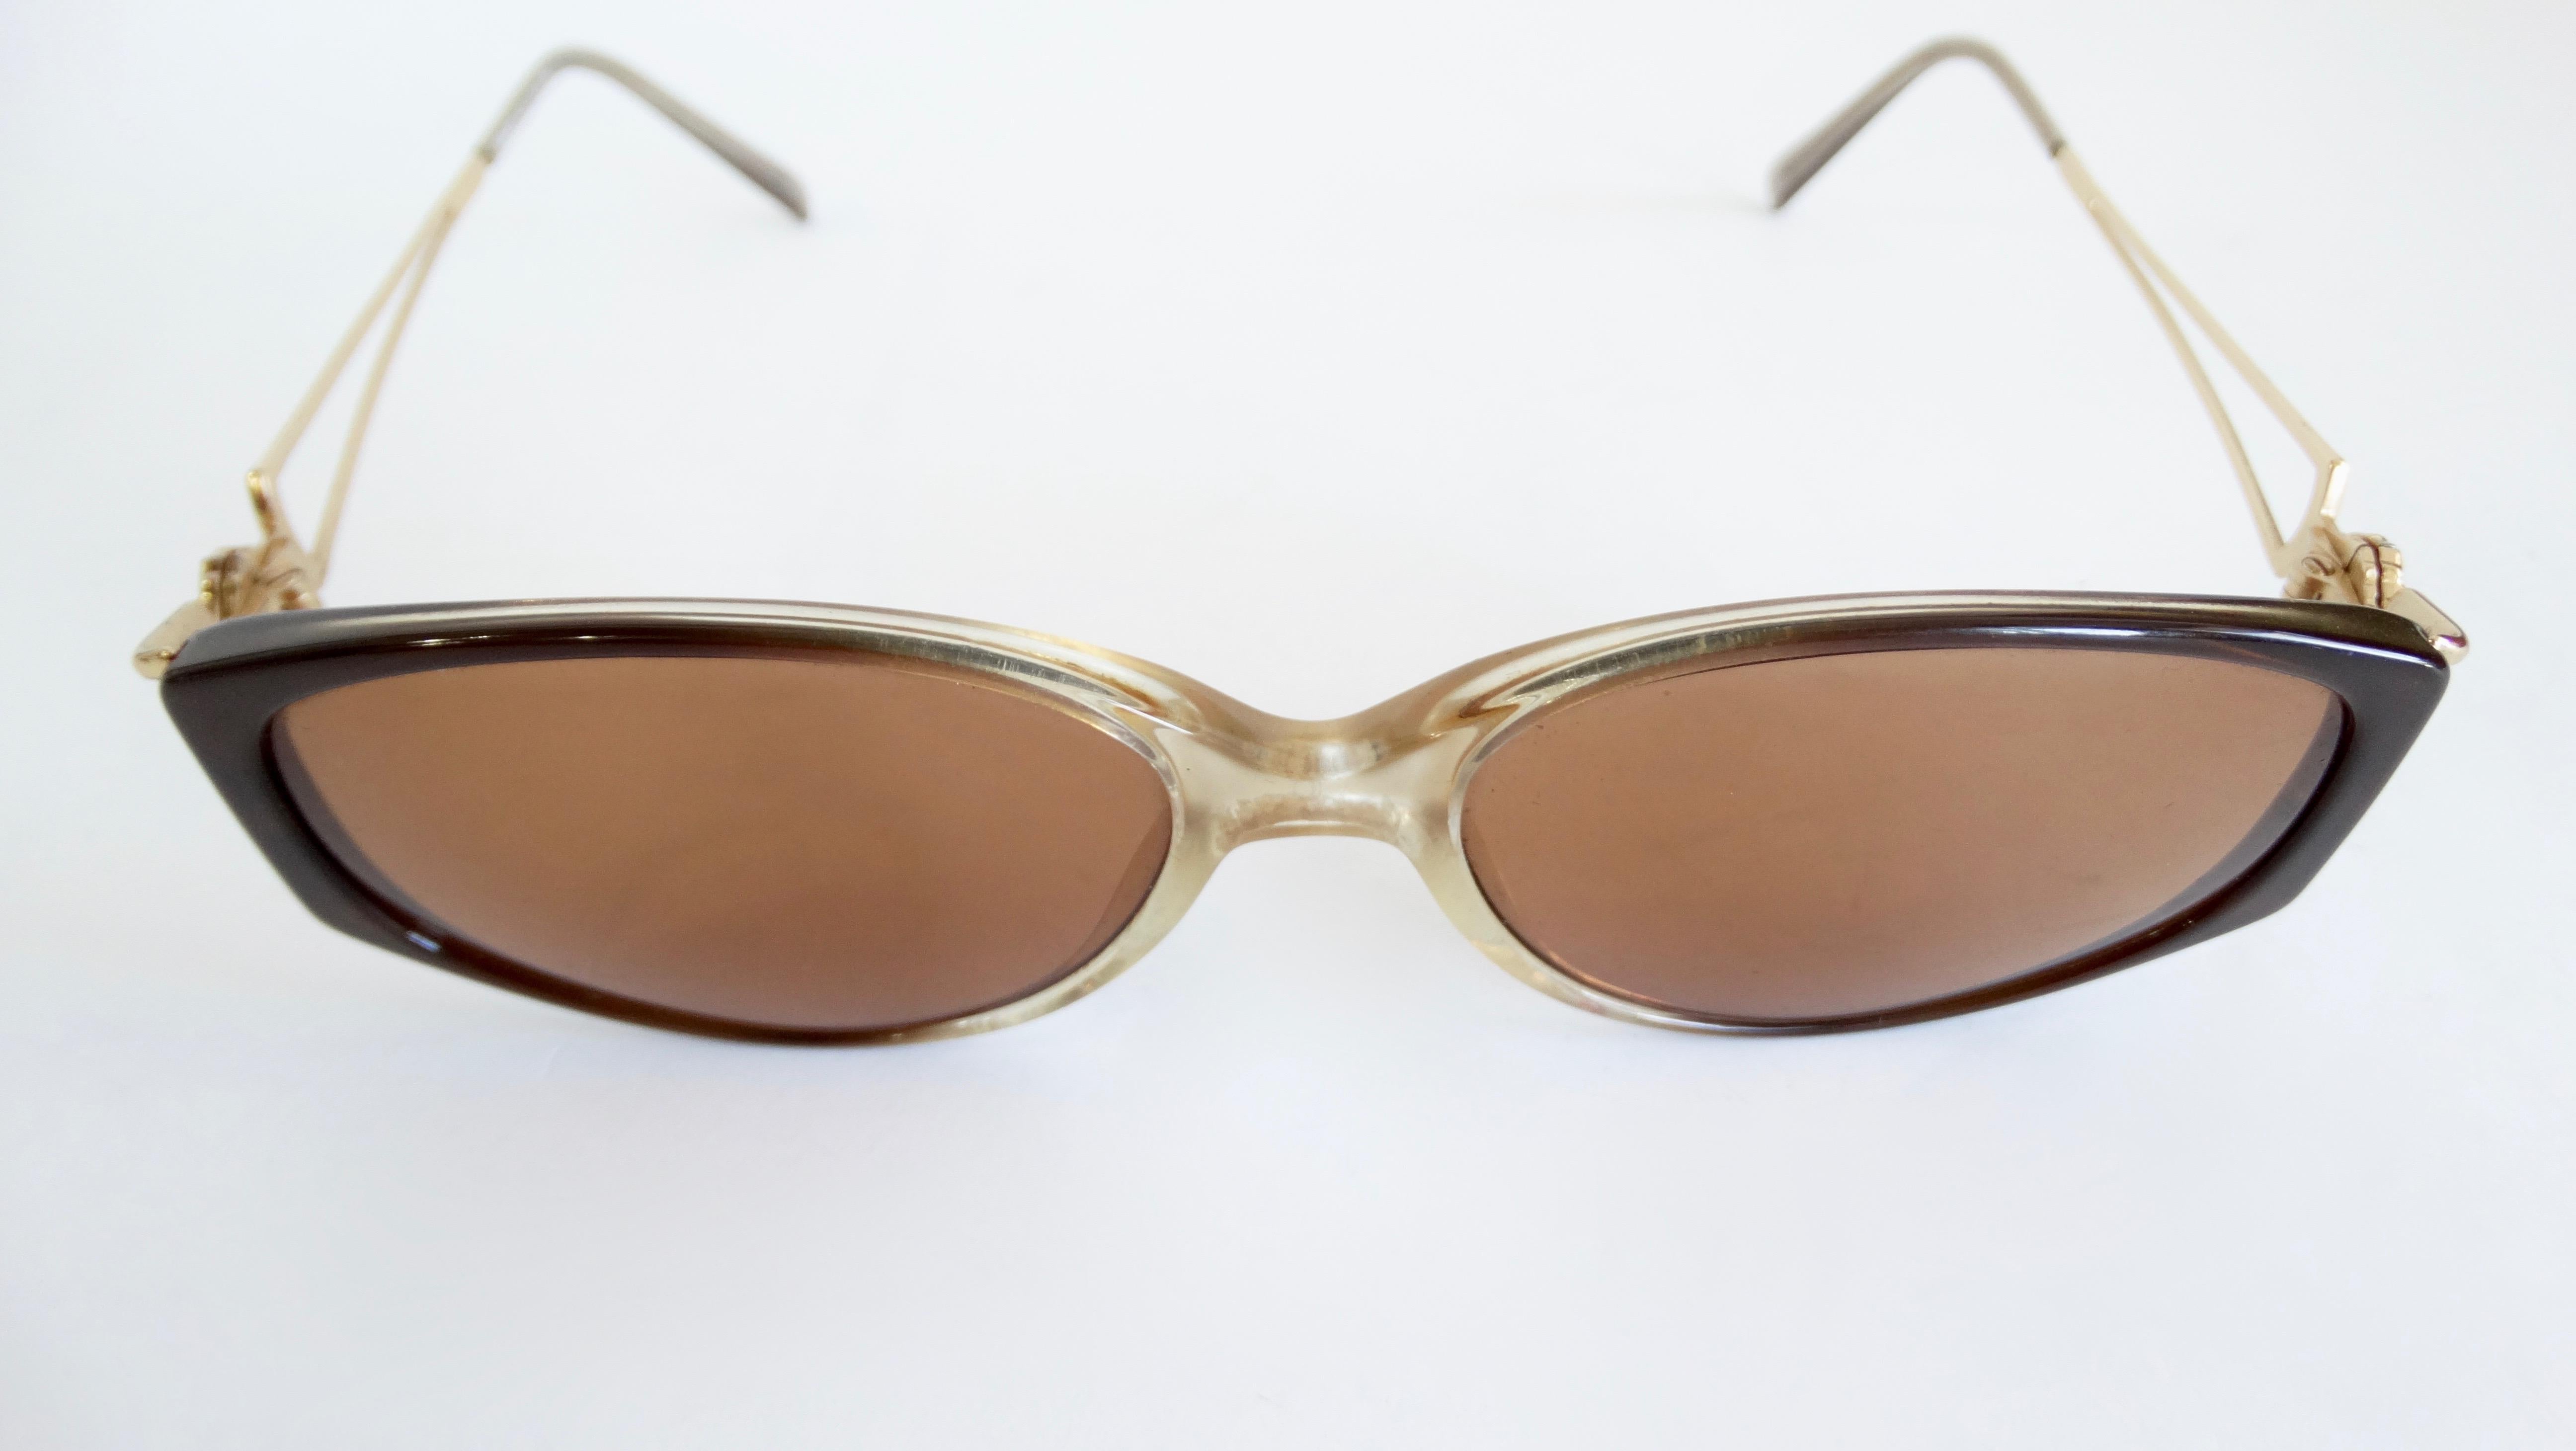 Gianni Versace 1990s Gradient Frame Sunglasses  For Sale 2